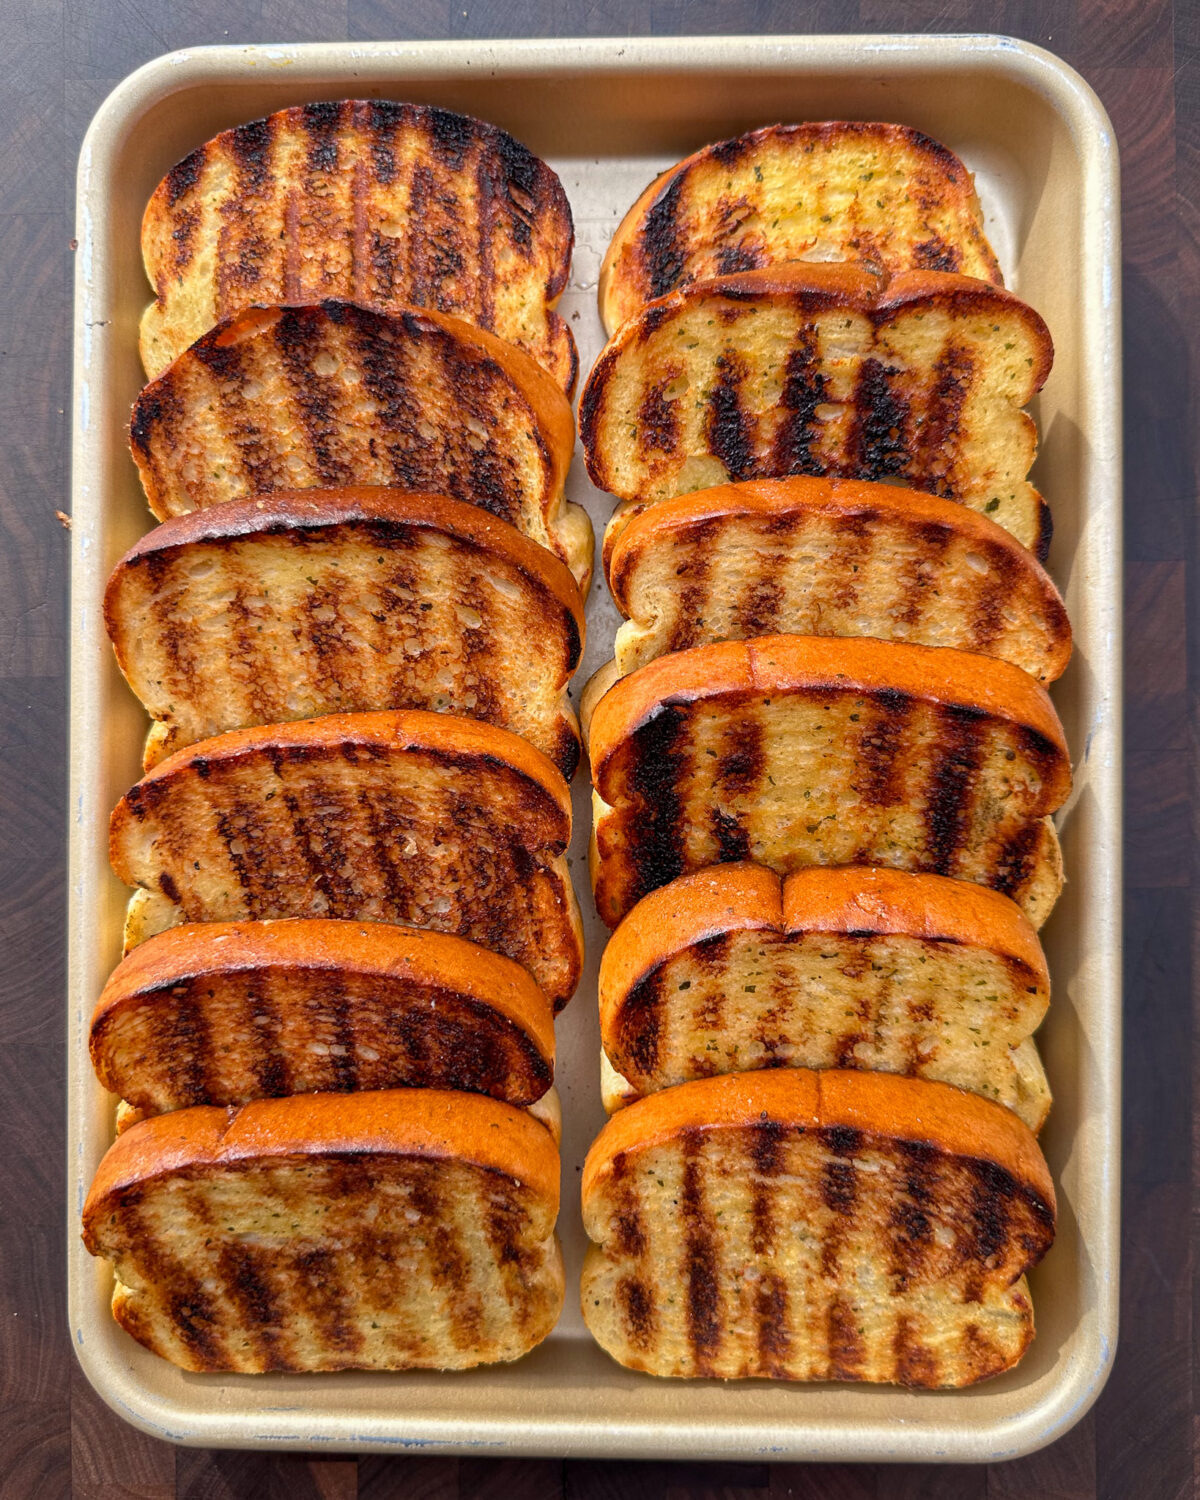 Place the Texas toast on the hot grill and grill each side for 15 to 30 seconds, until golden brown.